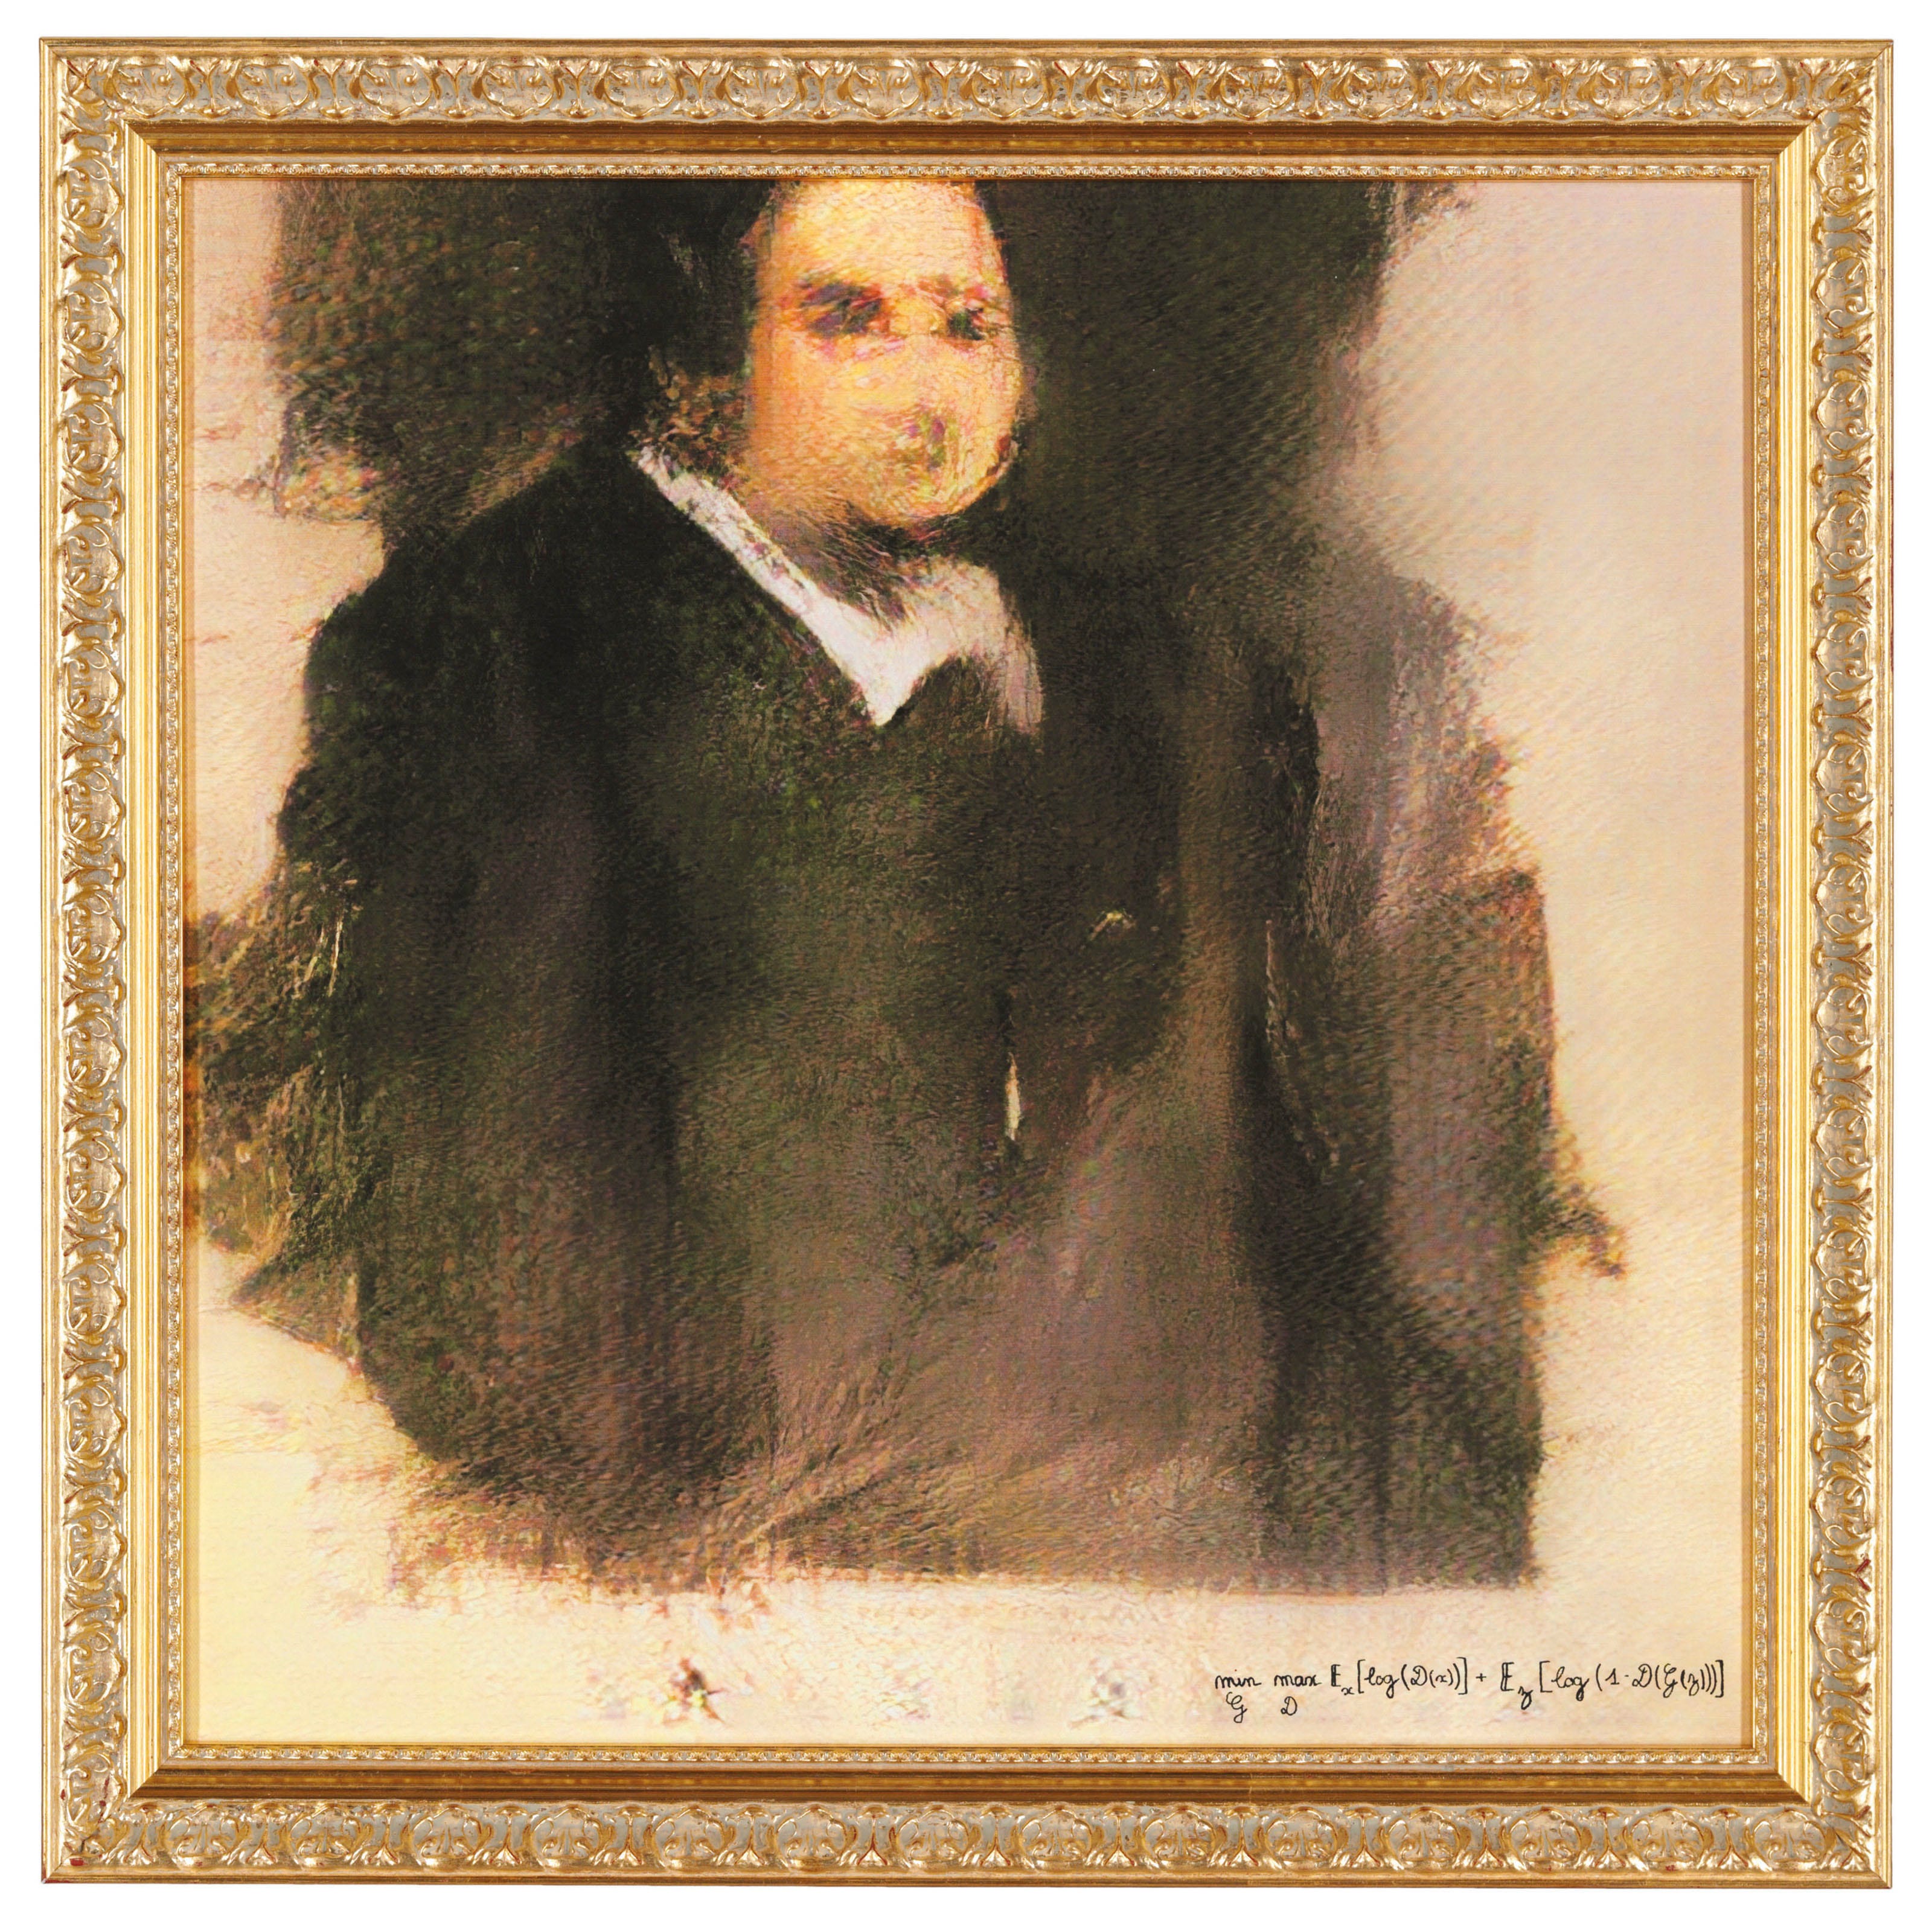 Christie's auctions painting made by AI for $432,500.